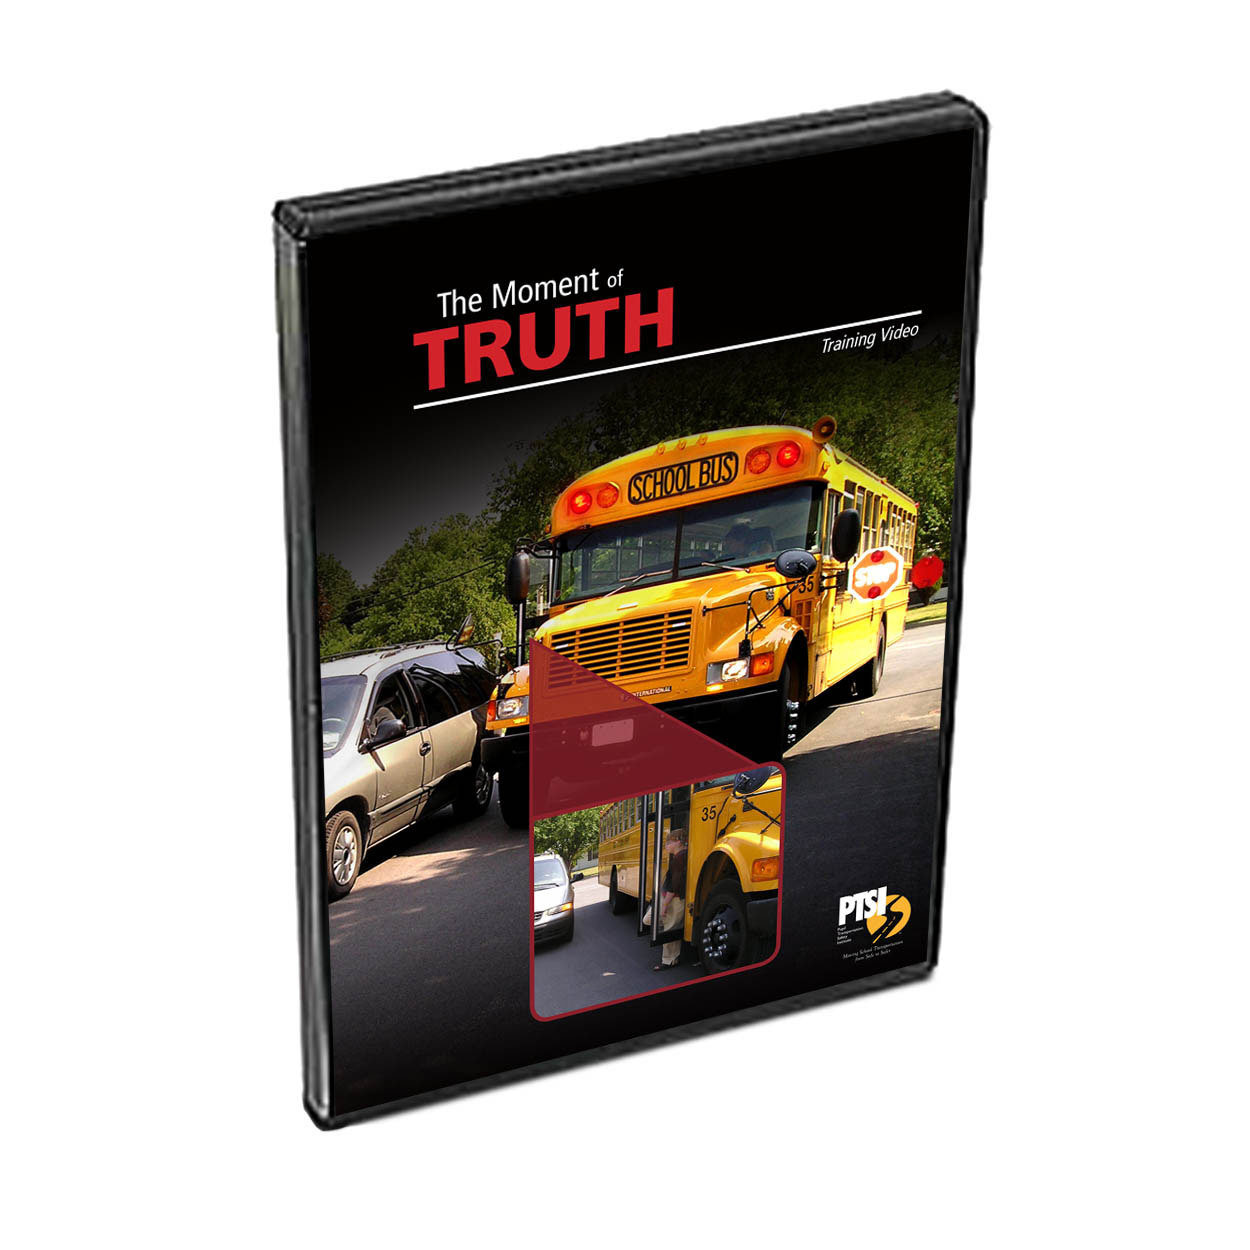 The Moment of Truth Training Video (DVD)